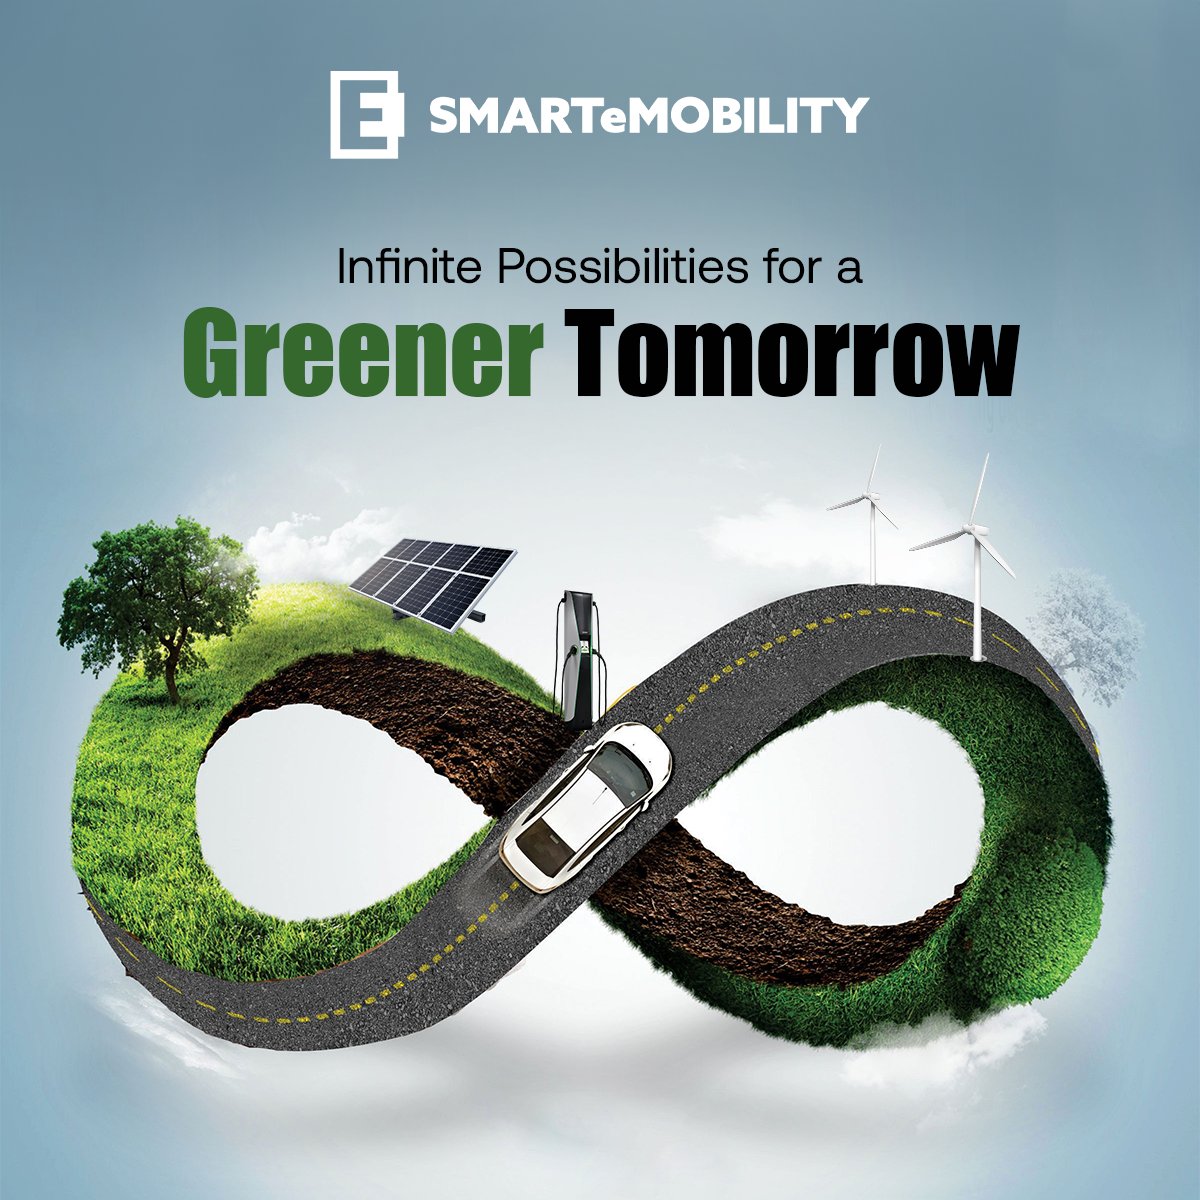 Happy International Mother Earth Day! 
At SmarteMobility, we are proud to lead the charge towards eMobility adoption and clean energy transformation!
More here: smartemobility.ai
#EarthDay #Sustainability #eMobility #EVFuture